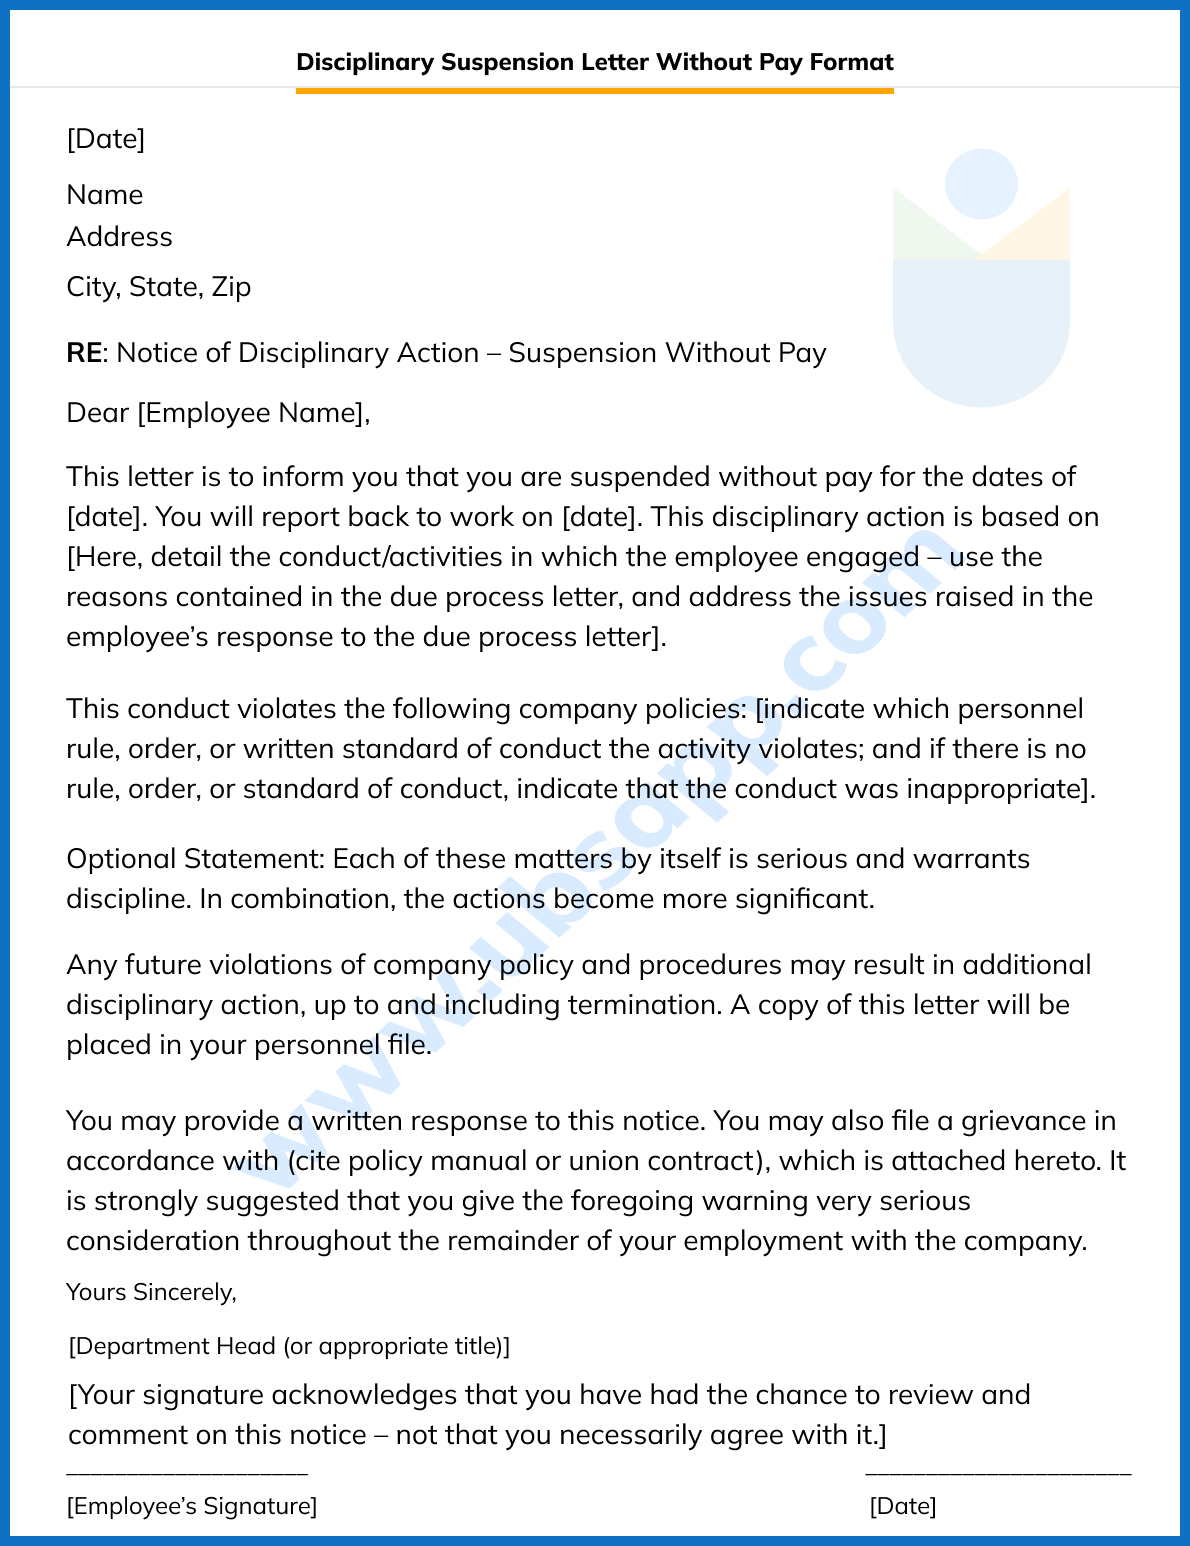 Disciplinary Suspension Letter Without Pay Format